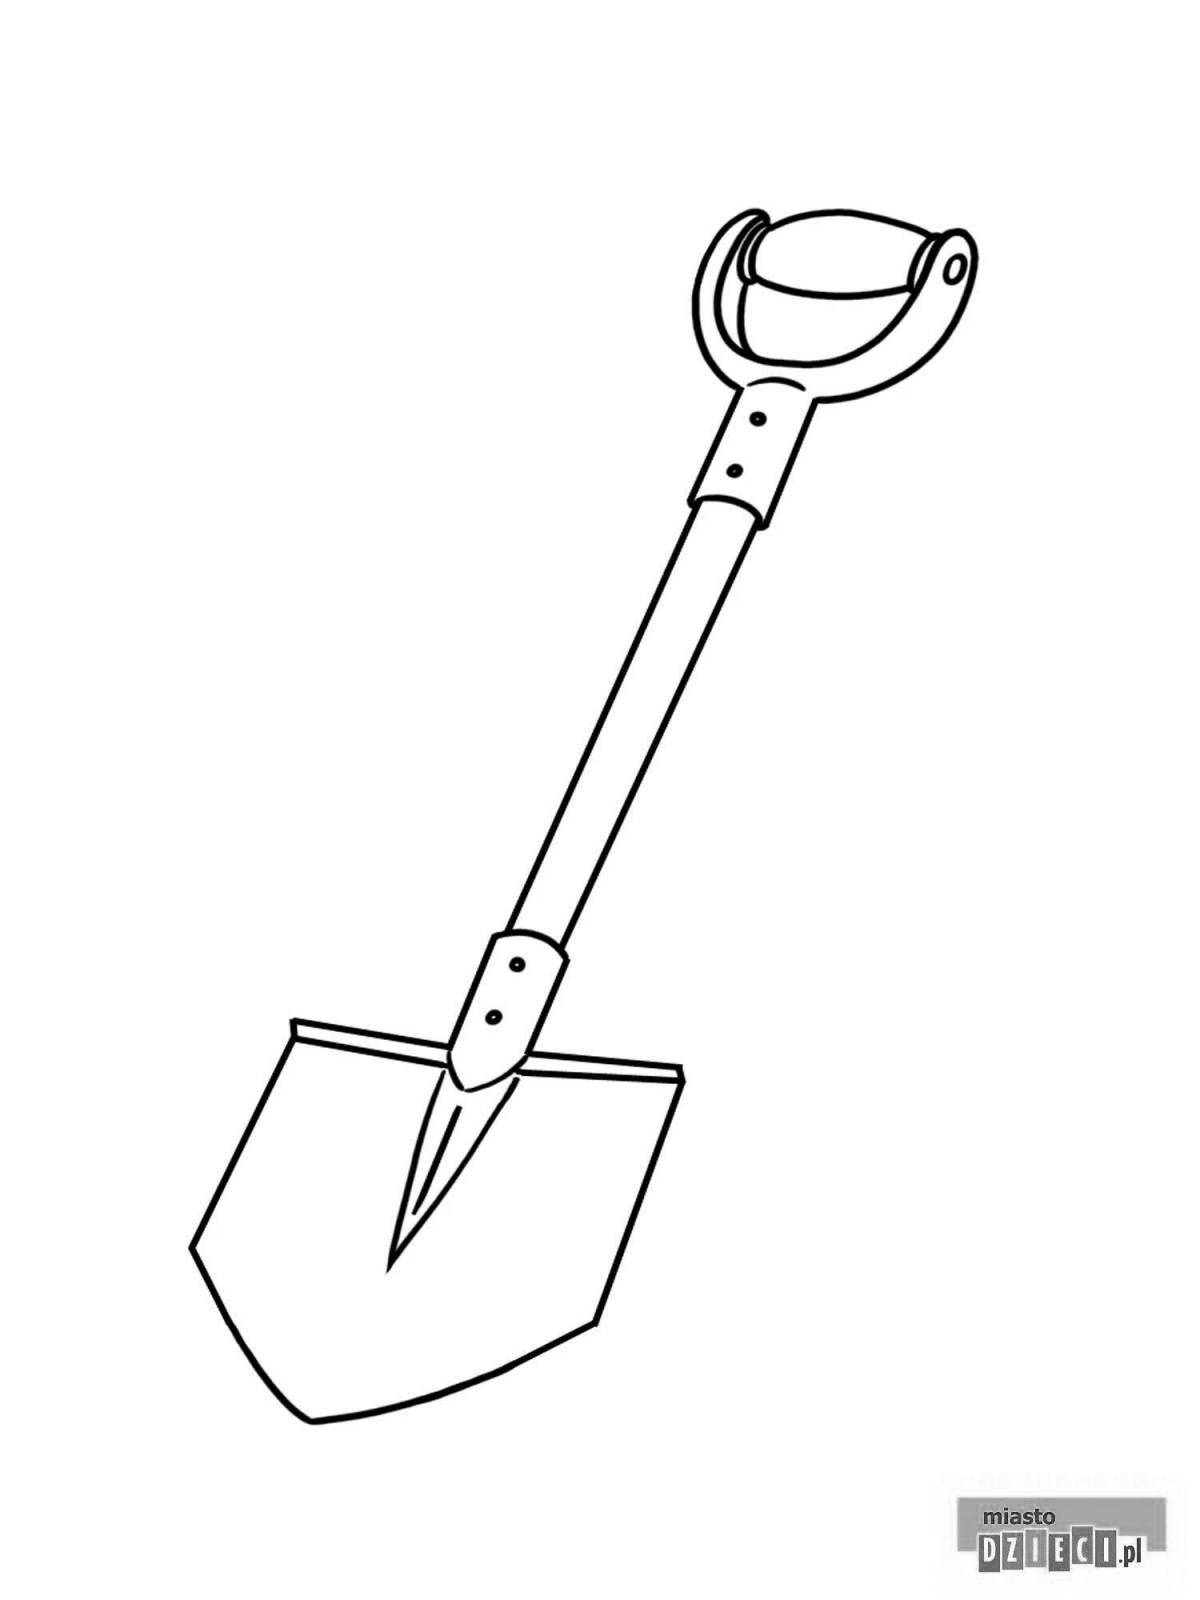 Great shovel coloring for students